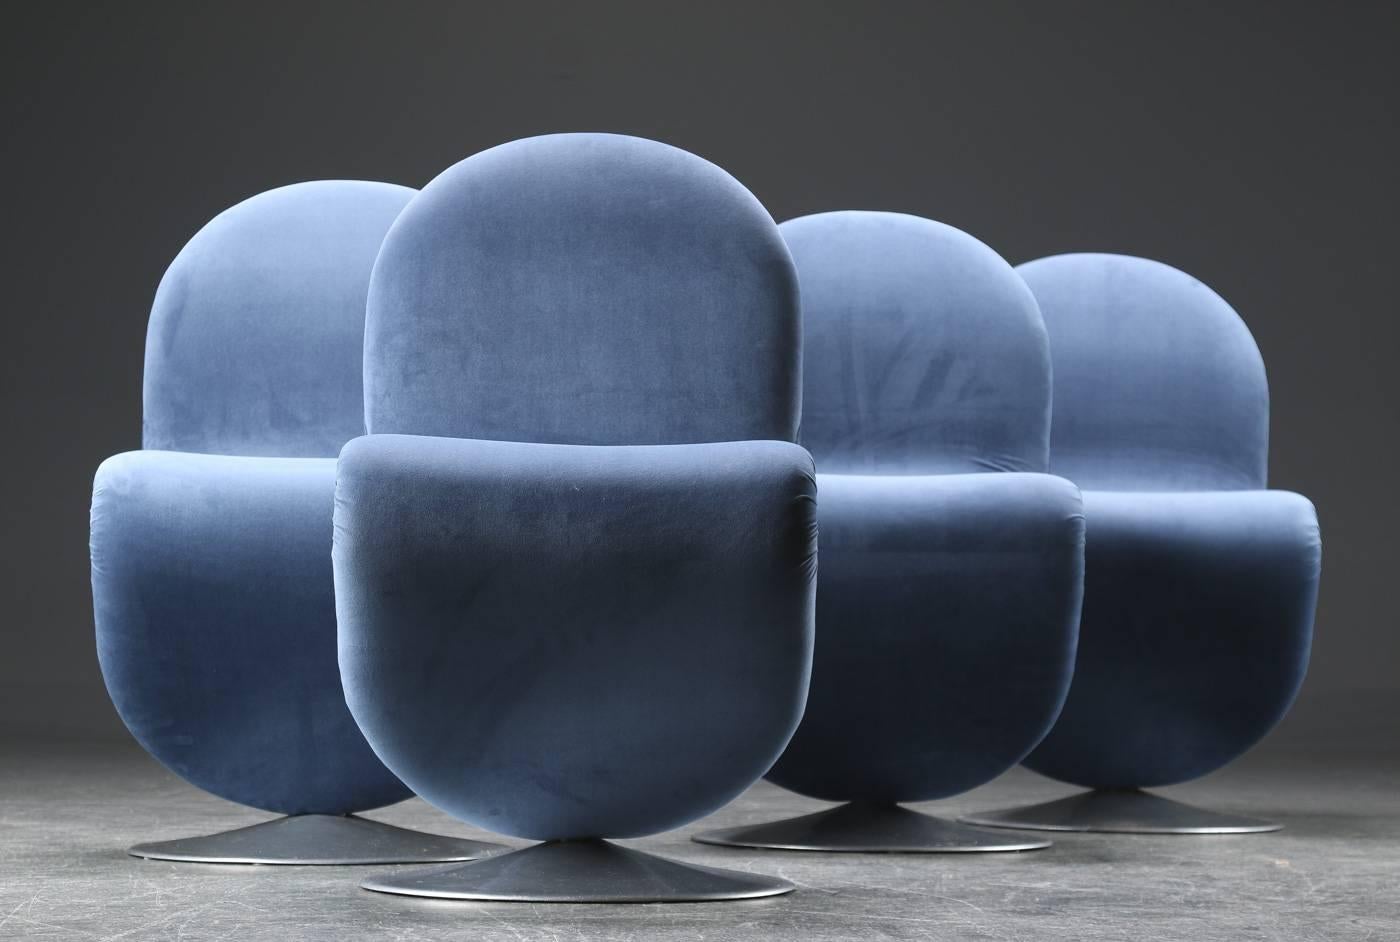 Beautiful set of four chairs by Verner Panton from the 1-2-3 Series;
Early edition by Fritz Hansen, circa 1970;
Reupholstered in blue velvet;